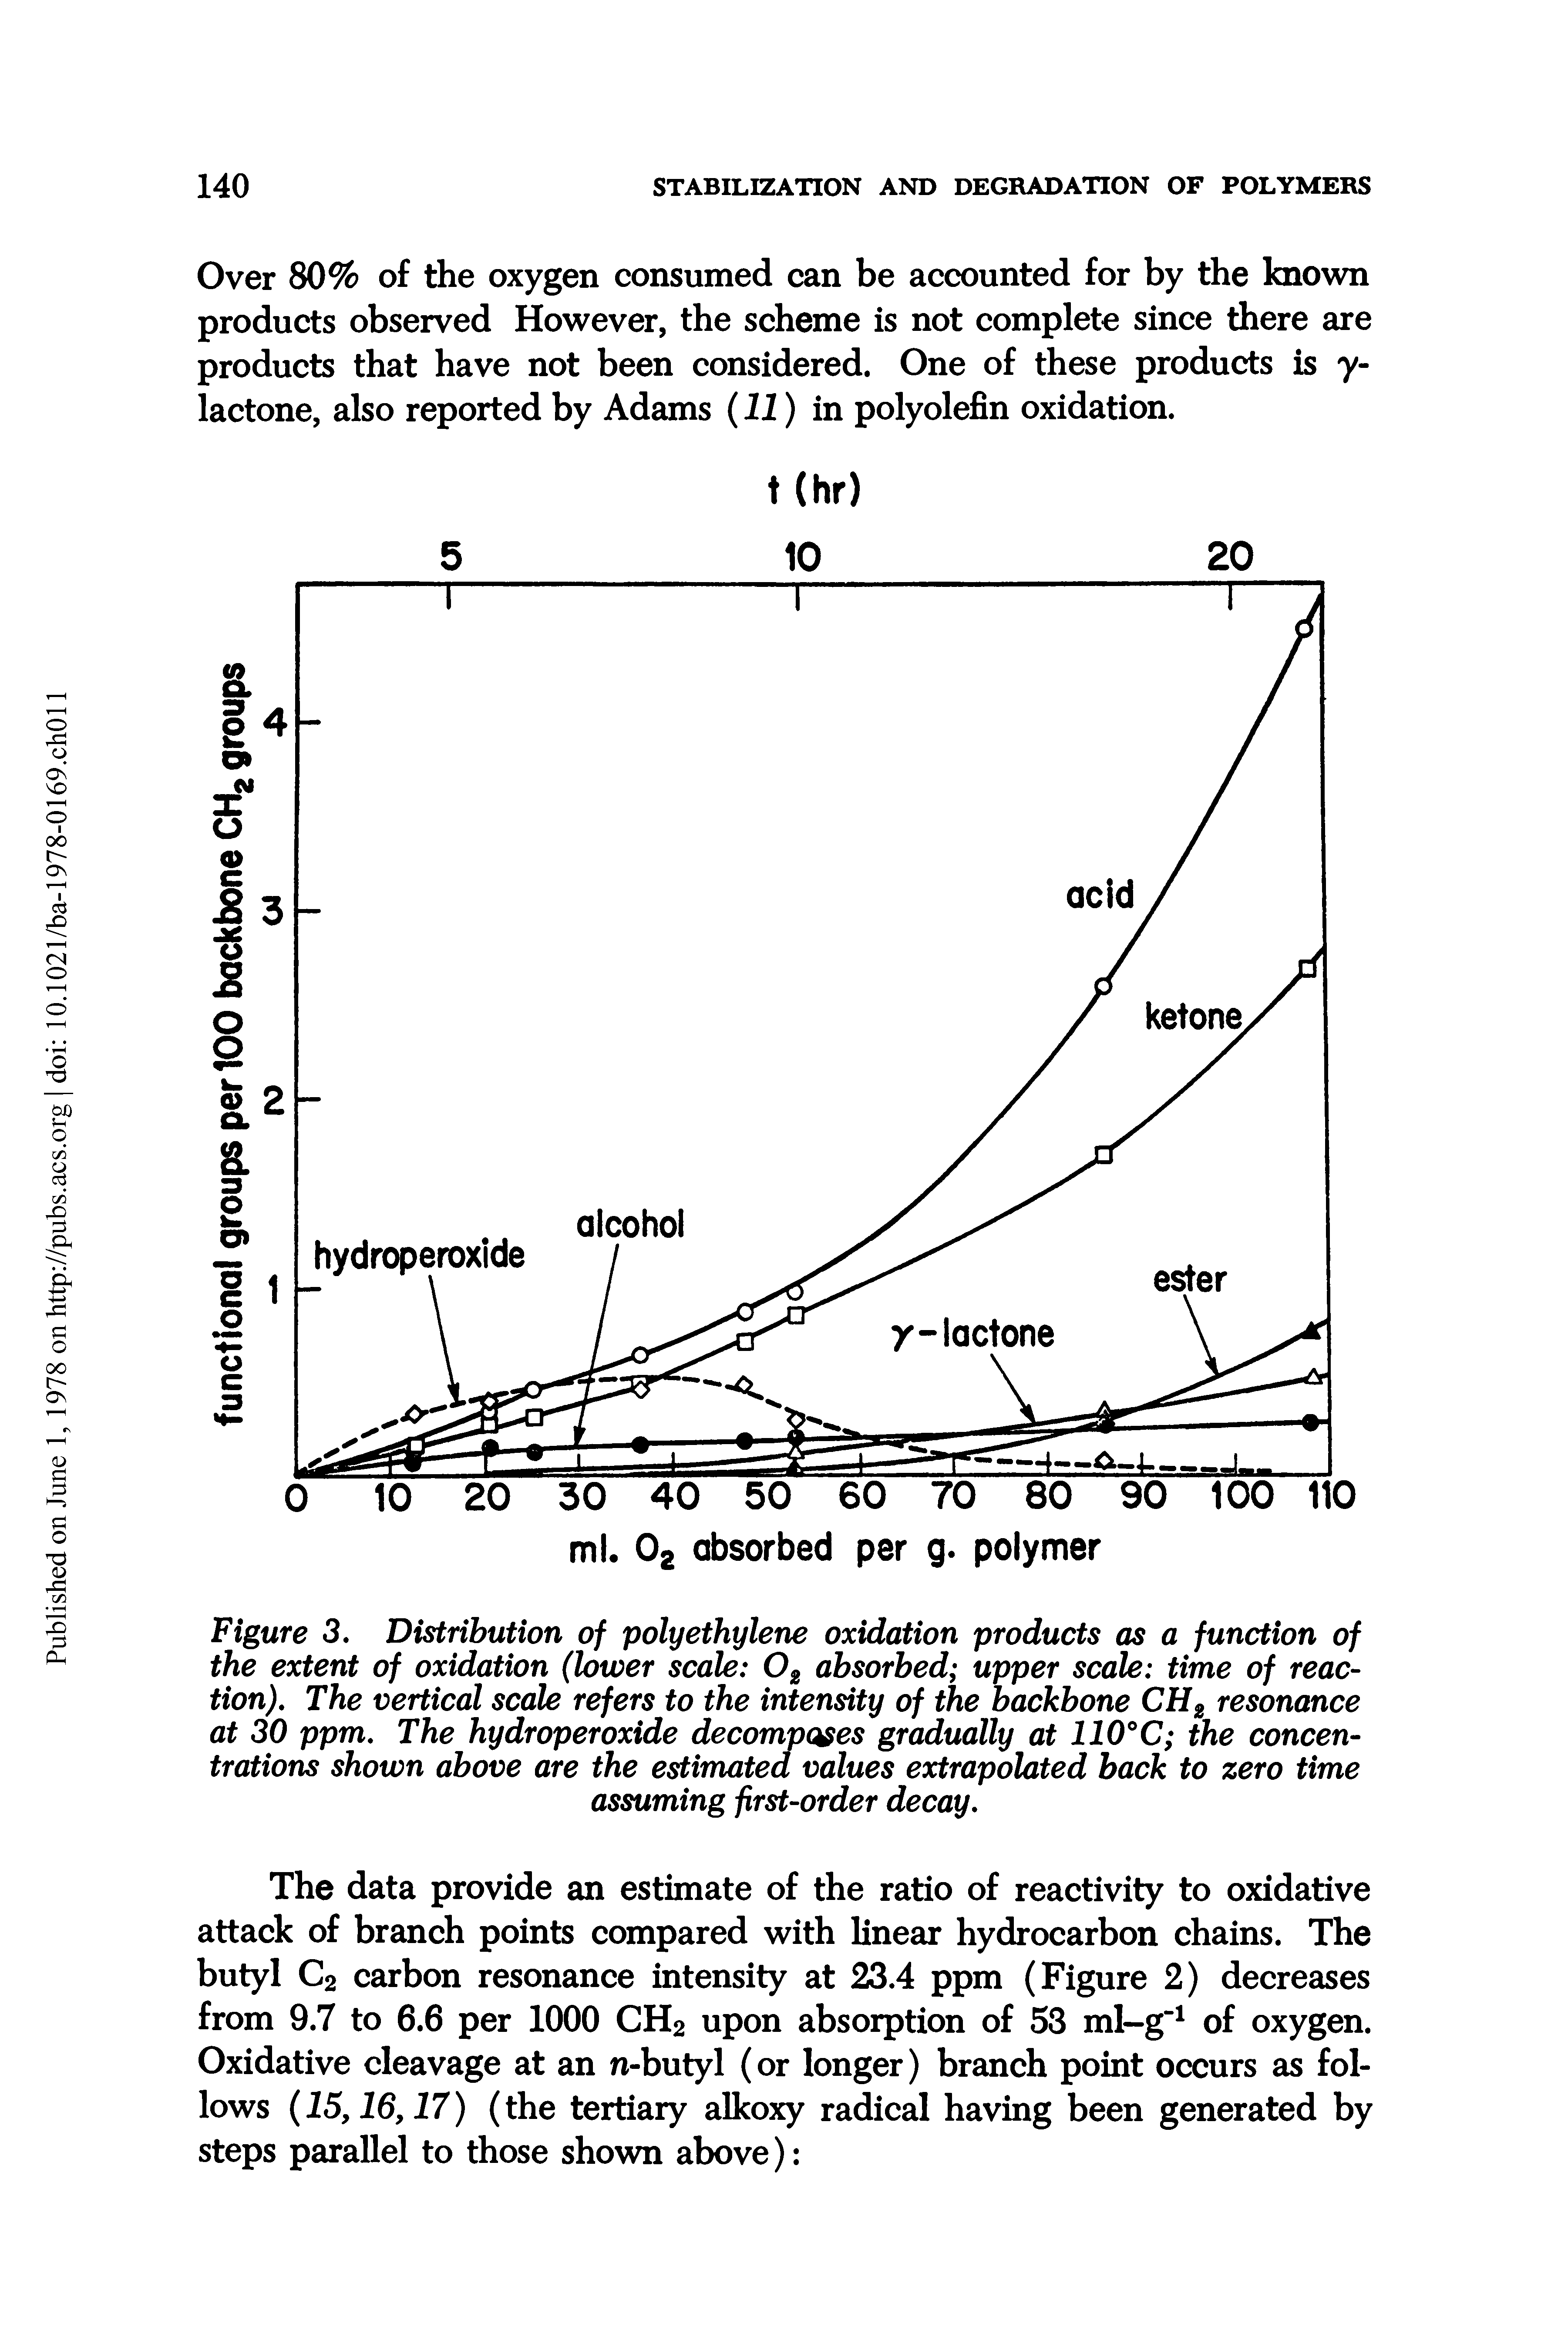 Figure 3. Distribution of polyethylene oxidation products as a function of the extent of oxidation (lower scale 02 absorbed upper scale time of reaction). The vertical scale refers to the intensity of the backbone CH2 resonance at 30 ppm. The hydroperoxide decomposes gradually at 110°C the concentrations shown above are the estimated values extrapolated back to zero time assuming first-order decay.